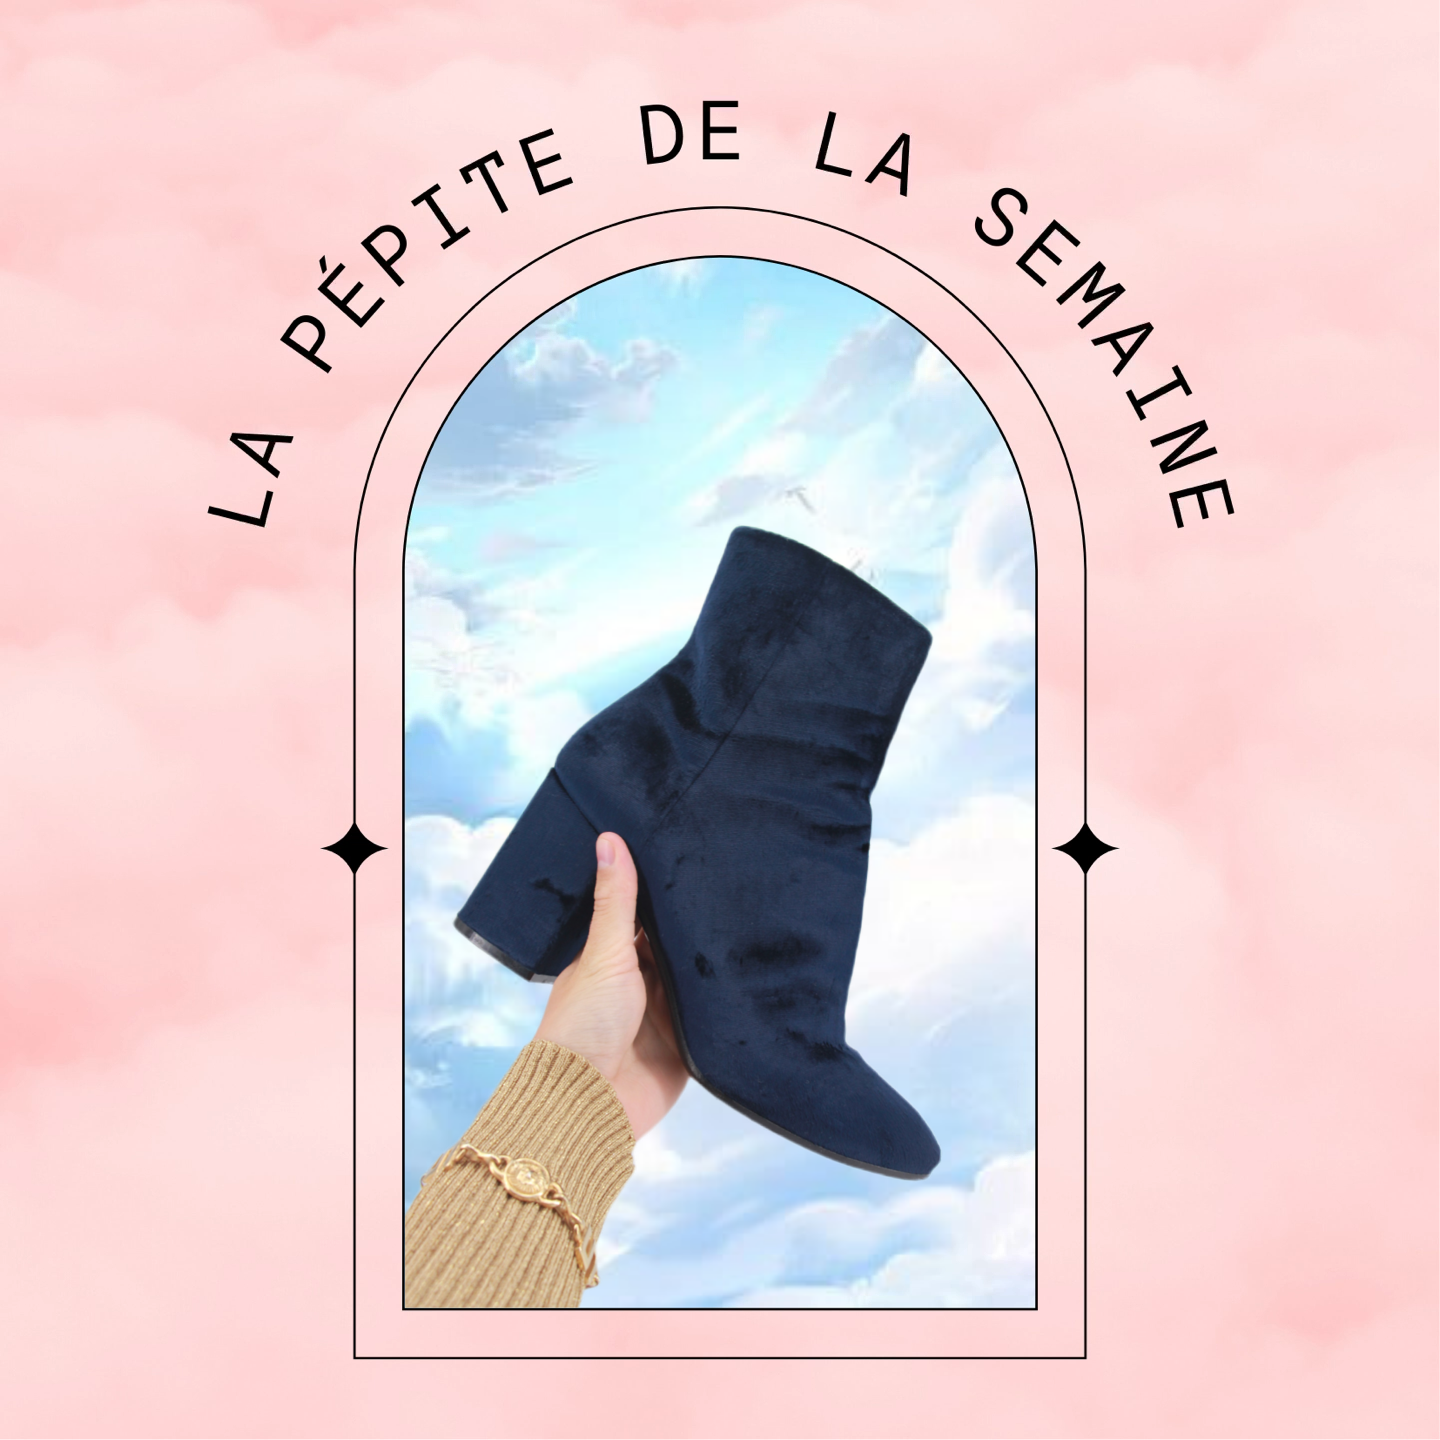 bottines_ankle_boots_BALENCIAGA_bleu_blue_velours_velvet_the_tiger_twist_house_of_bichonnage_chaussure_de_luxe_luxury_shoes_seconde_main_second_hand_renovee_renovated_cordonnerie_repa